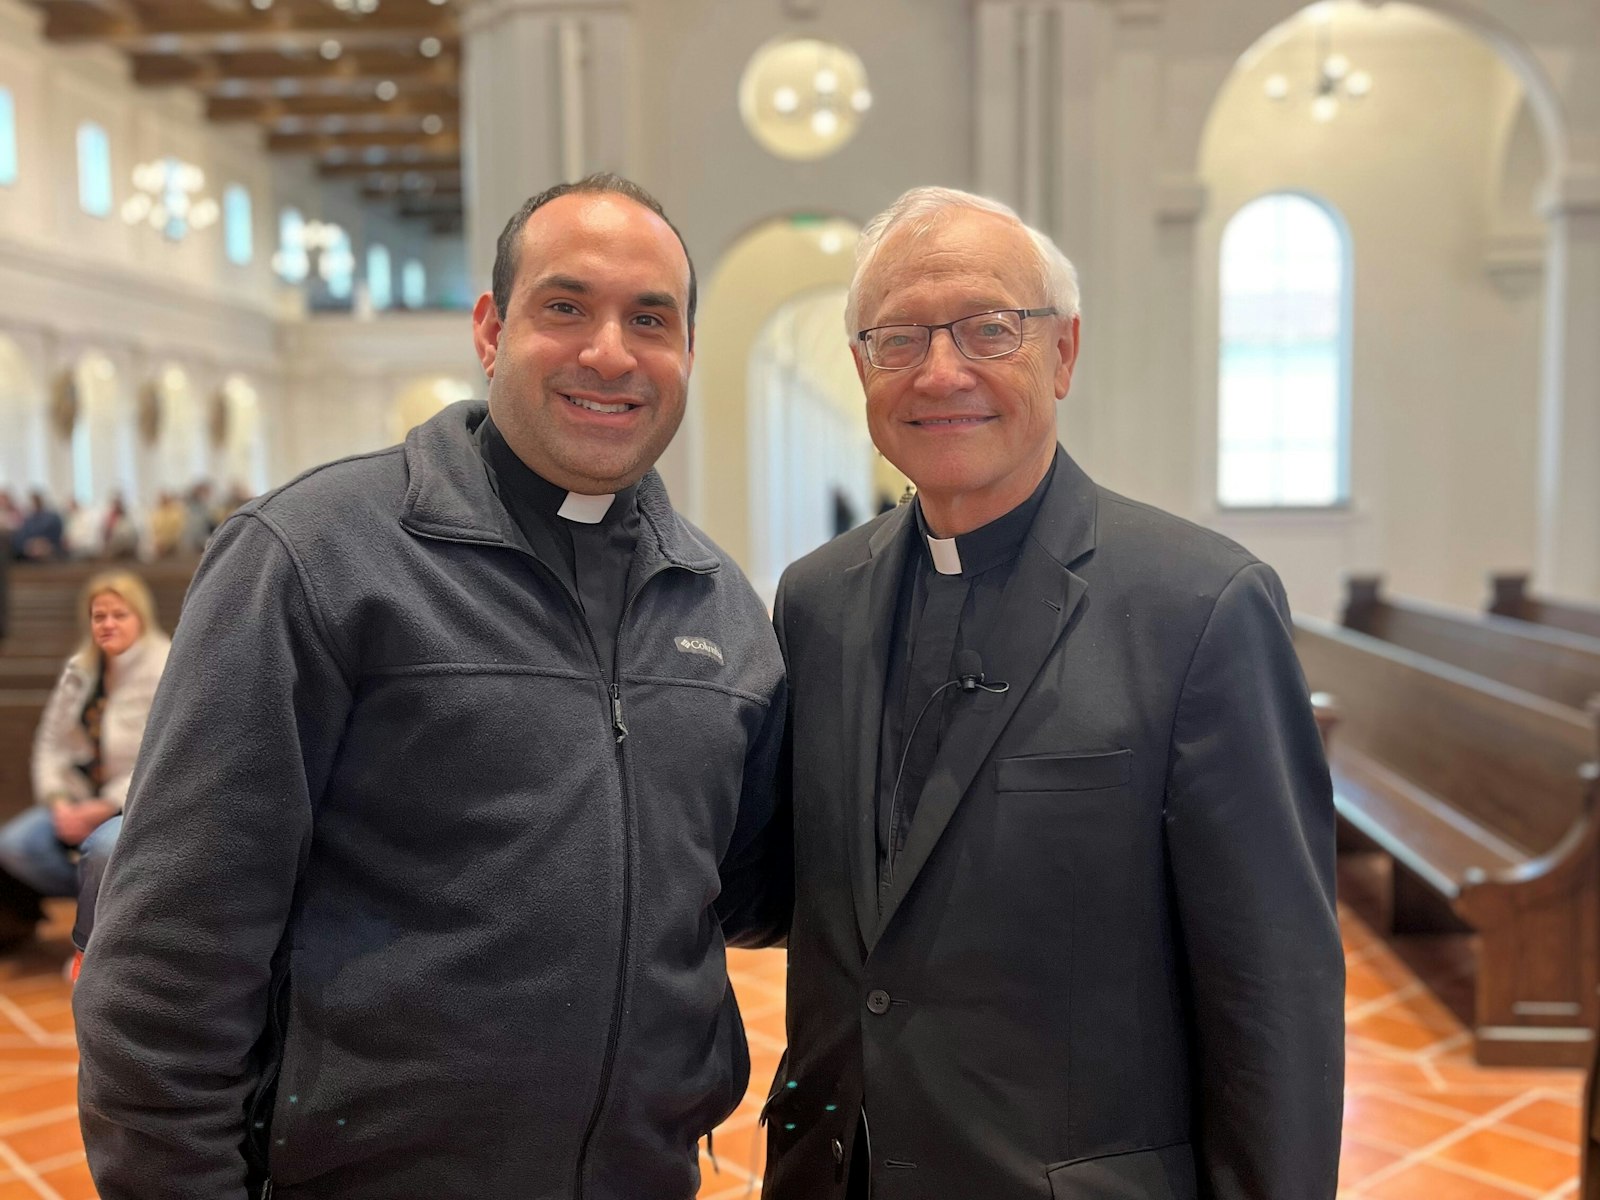 Fr. Zaid Chabaan, left, a priest of the Archdiocese of Detroit, is pictured with Fr. Don Wolf, a cousin of Blessed Stanley Rother, at the Blessed Stanley Rother Shrine in Oklahoma City in February. (Courtesy of Fr. Zaid Chabaan)